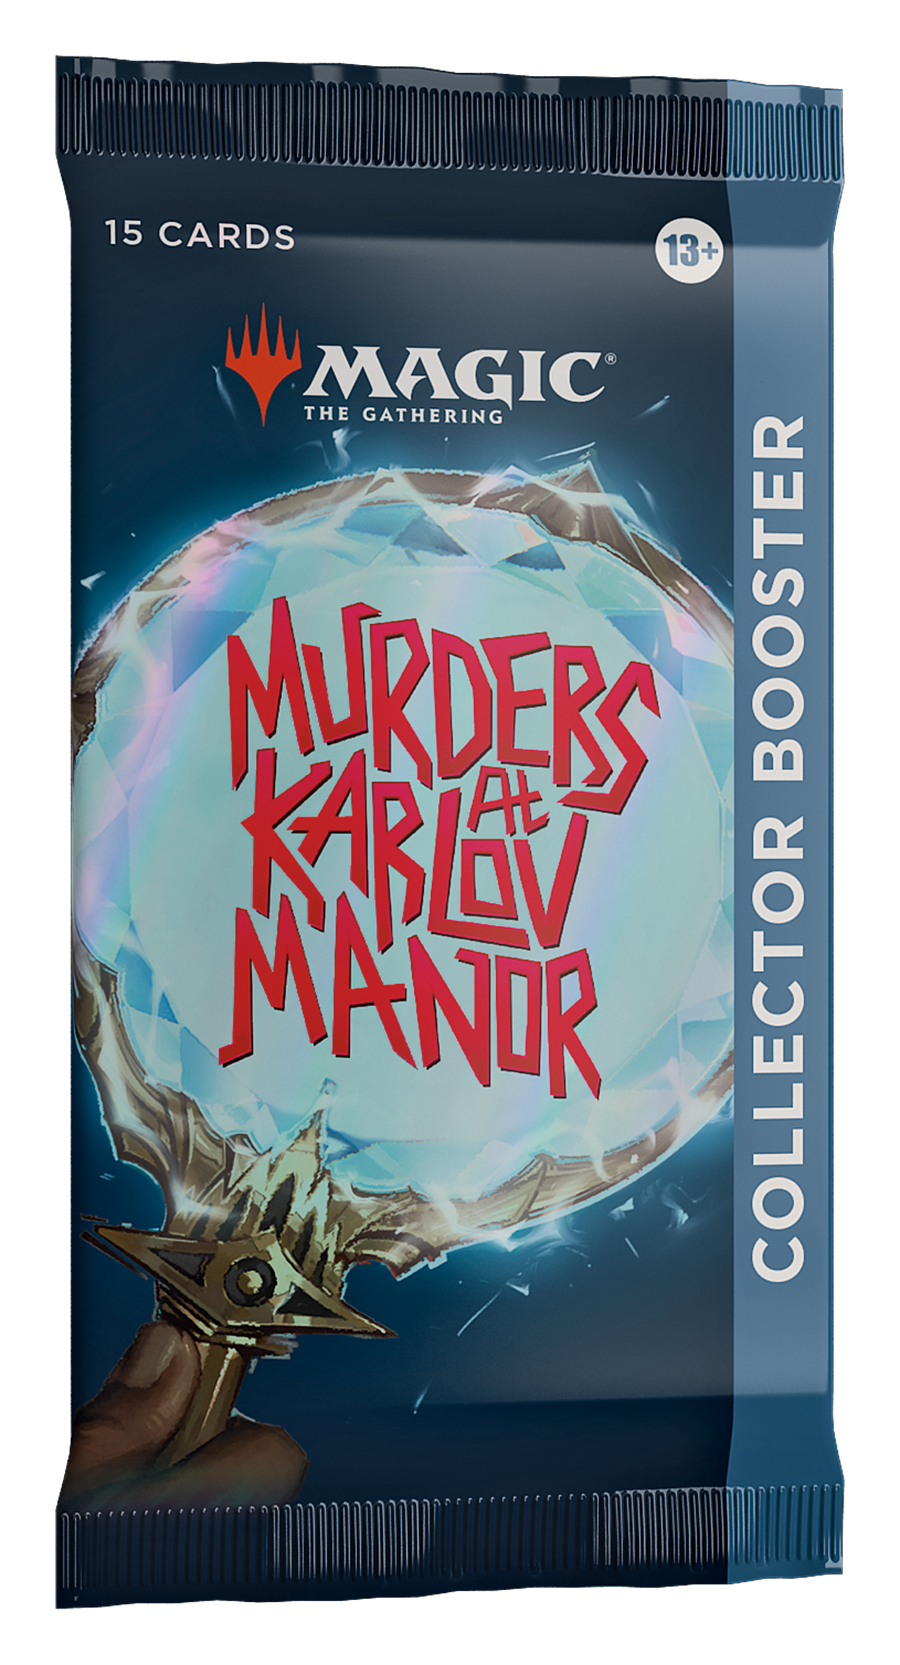 Magic the Gathering: Murders at Karlov Manor Collector's Booster Pack